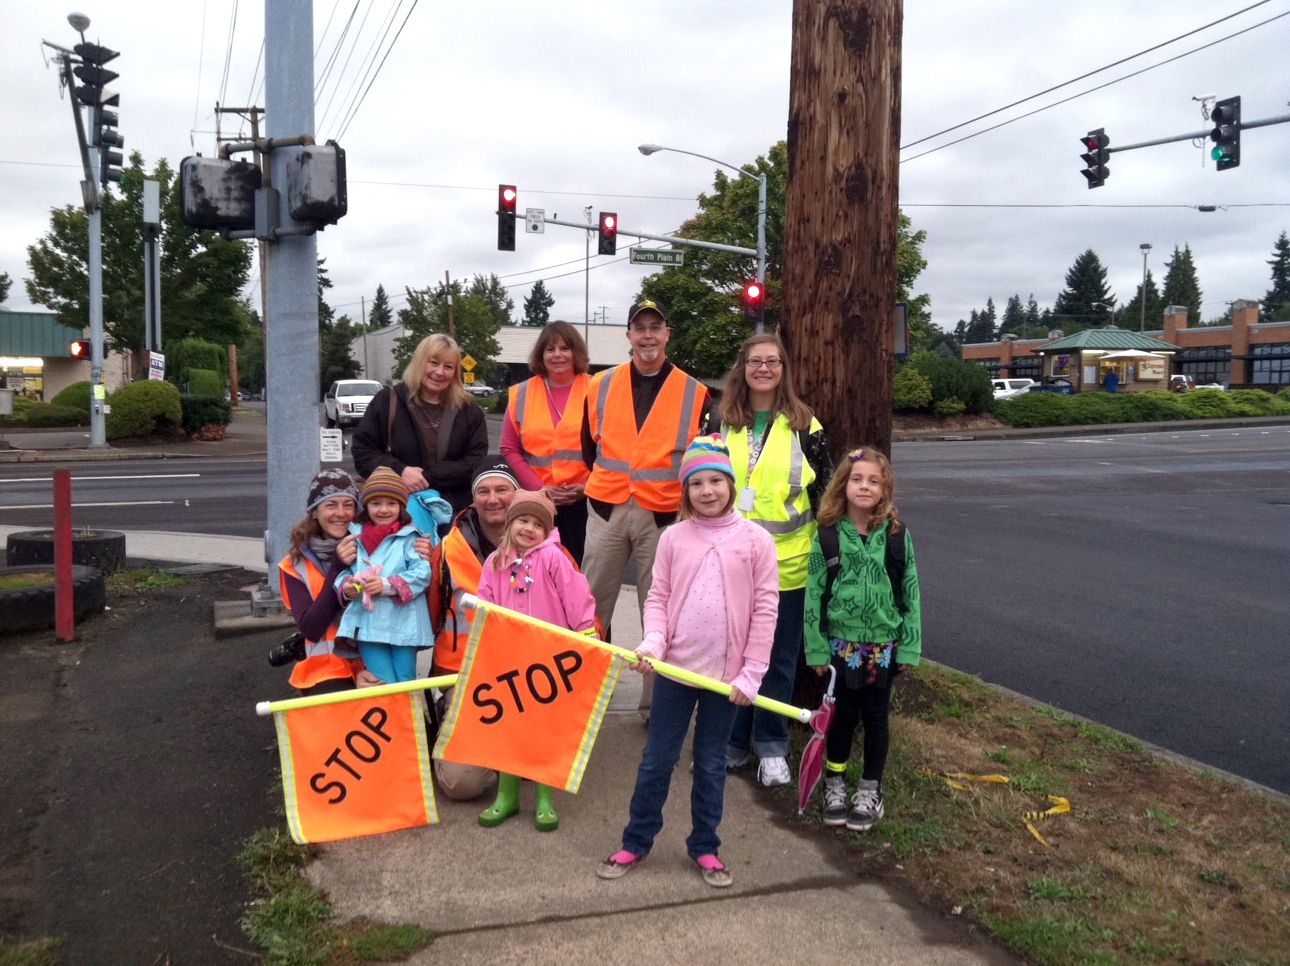 Hough neighbors, students and families walked to school Oct. 5 on International Walk to School Day. Front row, from left: Lisa Giacchino with Isabel, Eric Giacchino and Sophie, Lillia Browning and Maddy Pellico. Back row, from left: Kim Block, Anne Johnston, Rep.